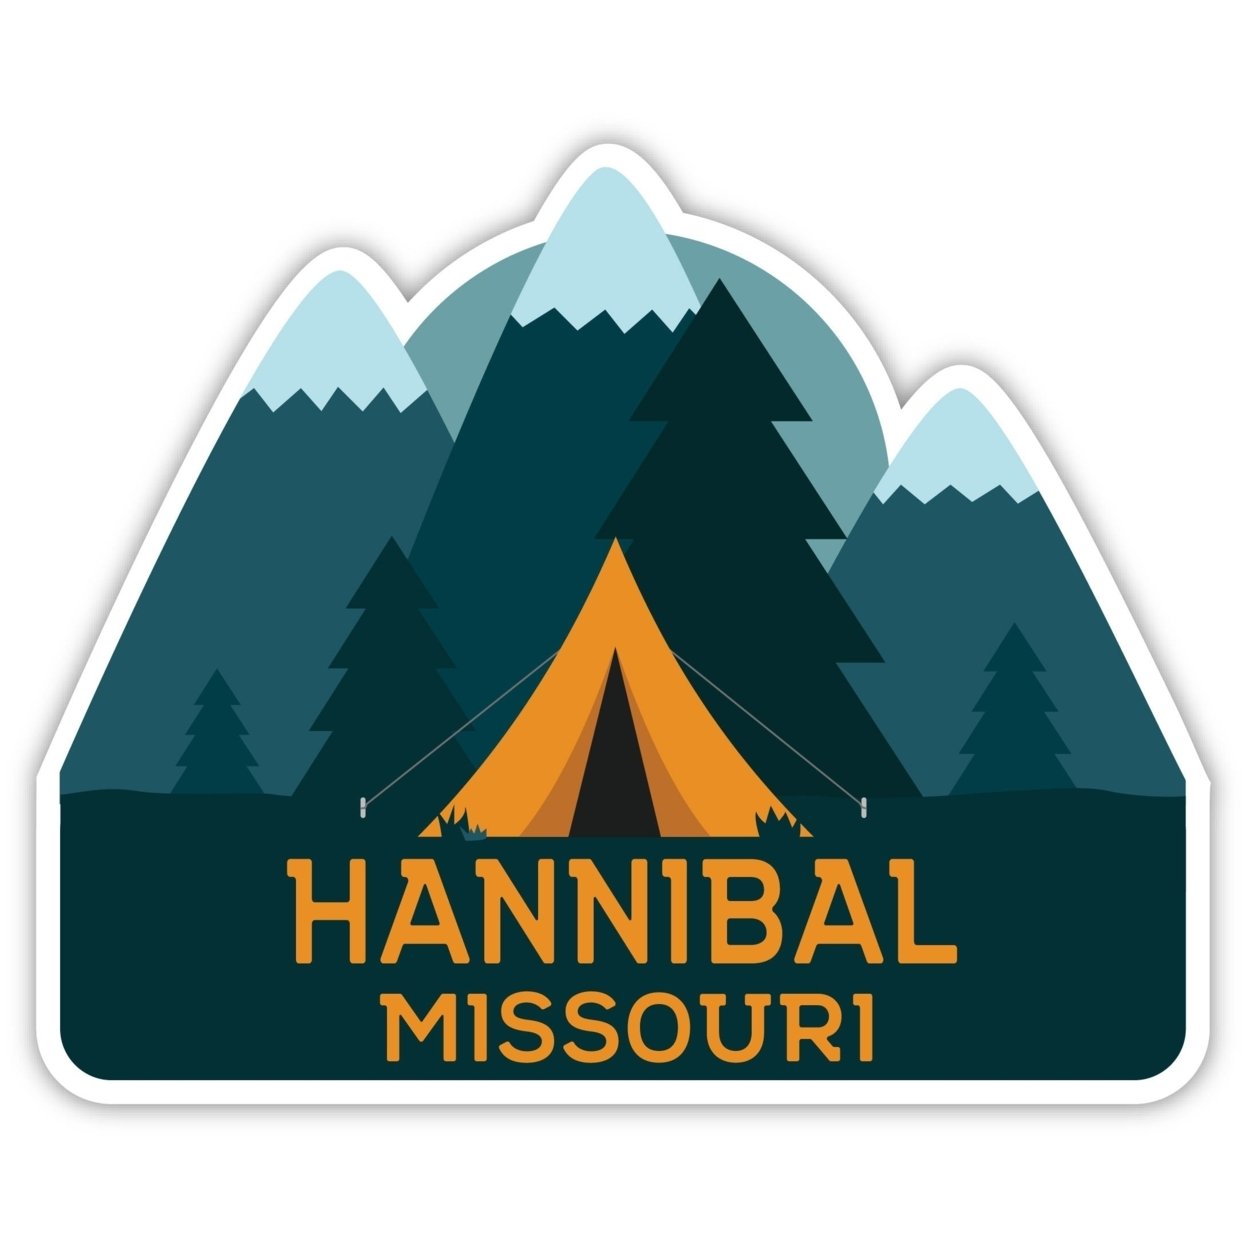 Hannibal Missouri Souvenir Decorative Stickers (Choose Theme And Size) - 4-Pack, 6-Inch, Camp Life